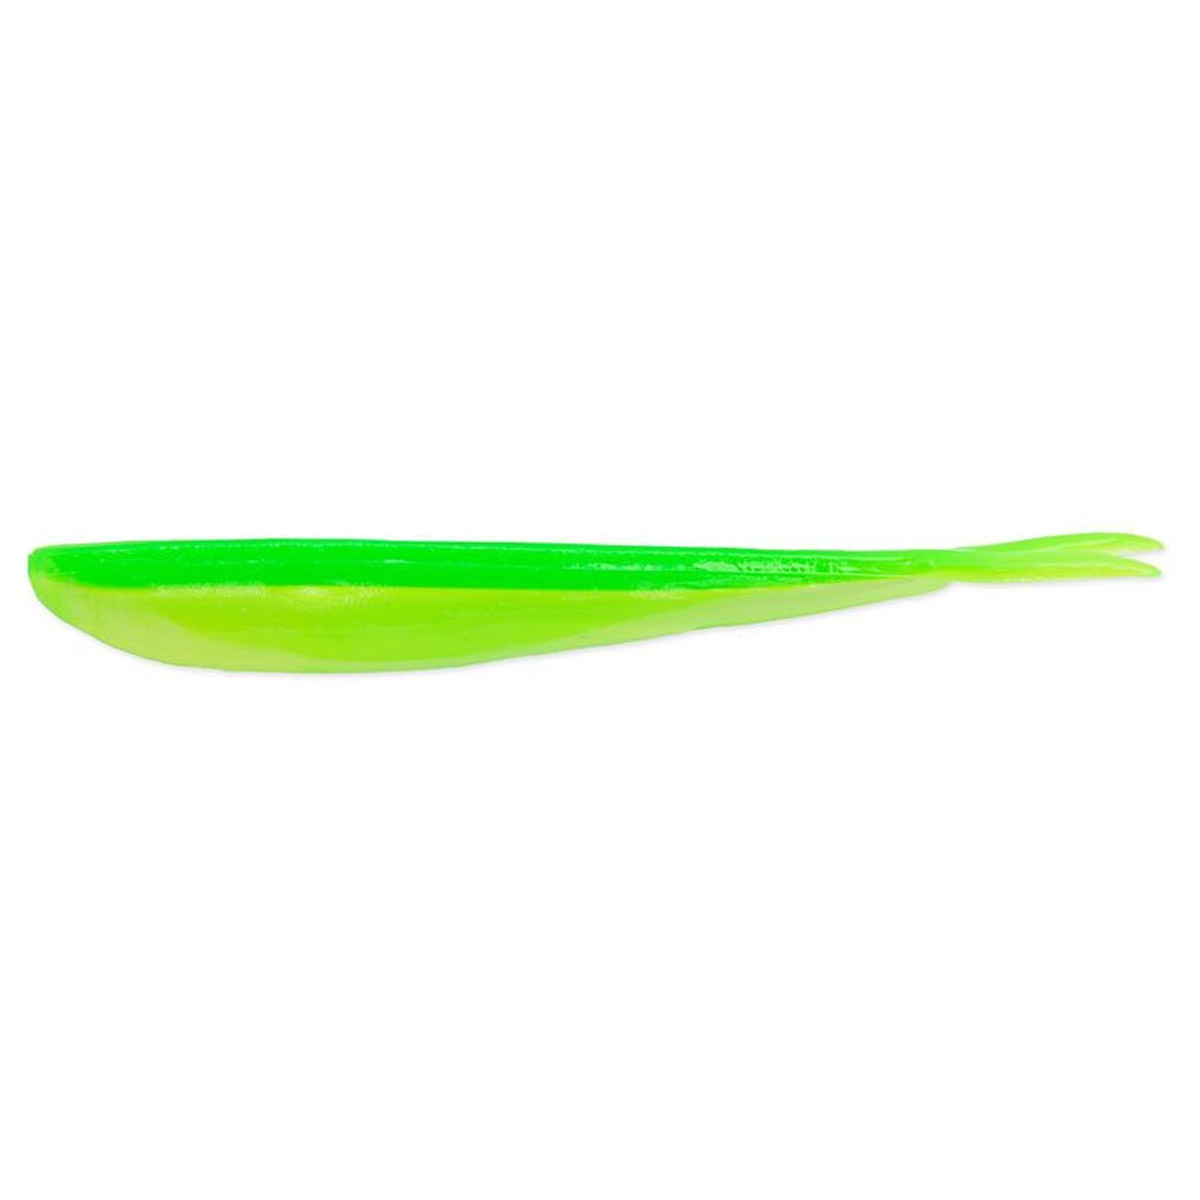 Lunker City Fin-S Fish 5 Inch -  Limetreuse